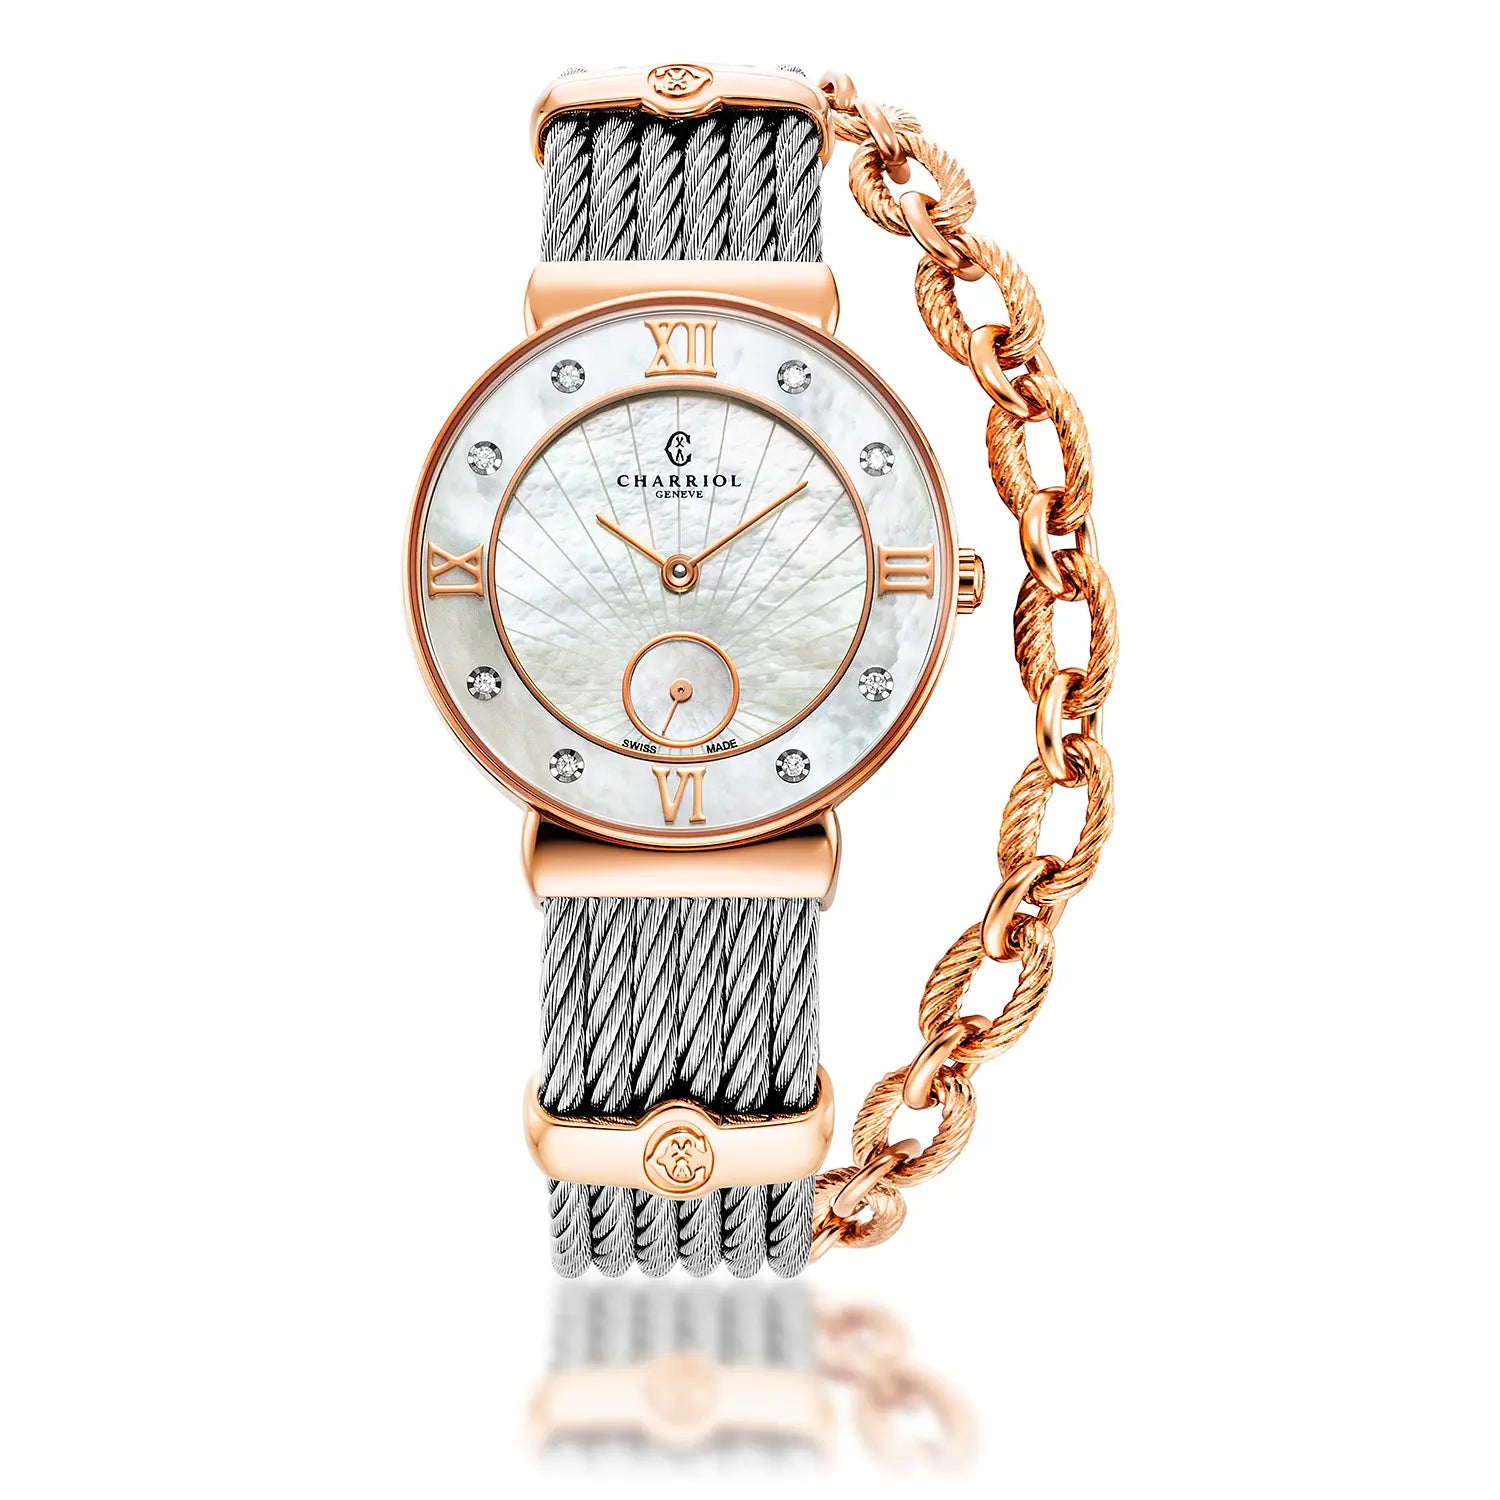 ST TROPEZ ICON, 30MM, QUARTZ CALIBRE, MOTHER-OF-PEARL SUNSHINE DIAL, MOTHER-OF-PEARL WITH 8 DIAMONDS BEZEL, STEEL CABLE BRACELET - Charriol Geneve -  Watch